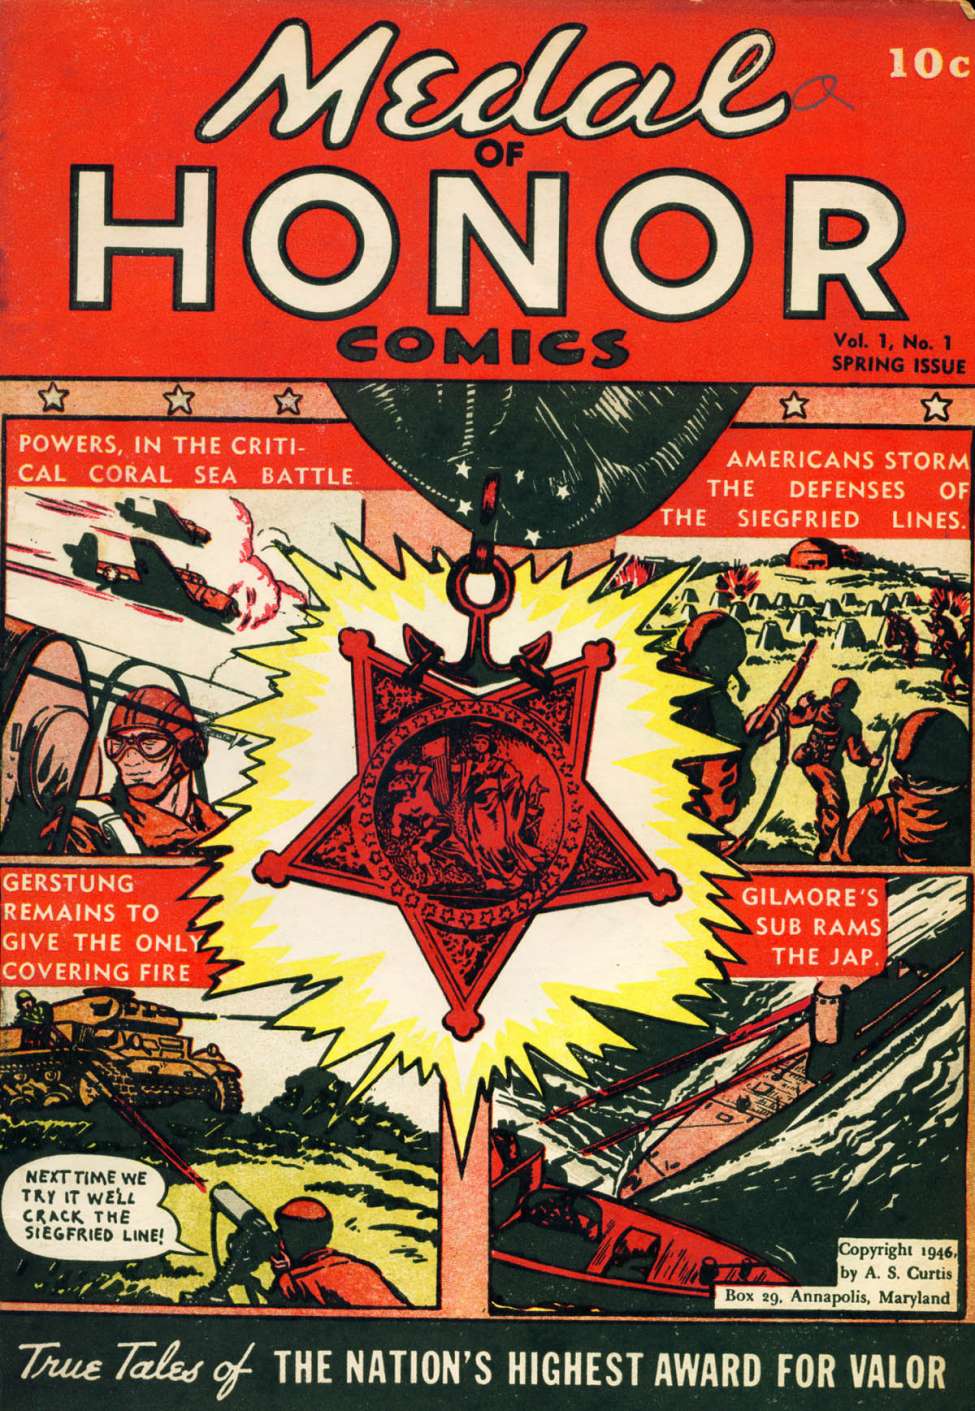 Comic Book Cover For Medal of Honor Comics 1 (Fiche)